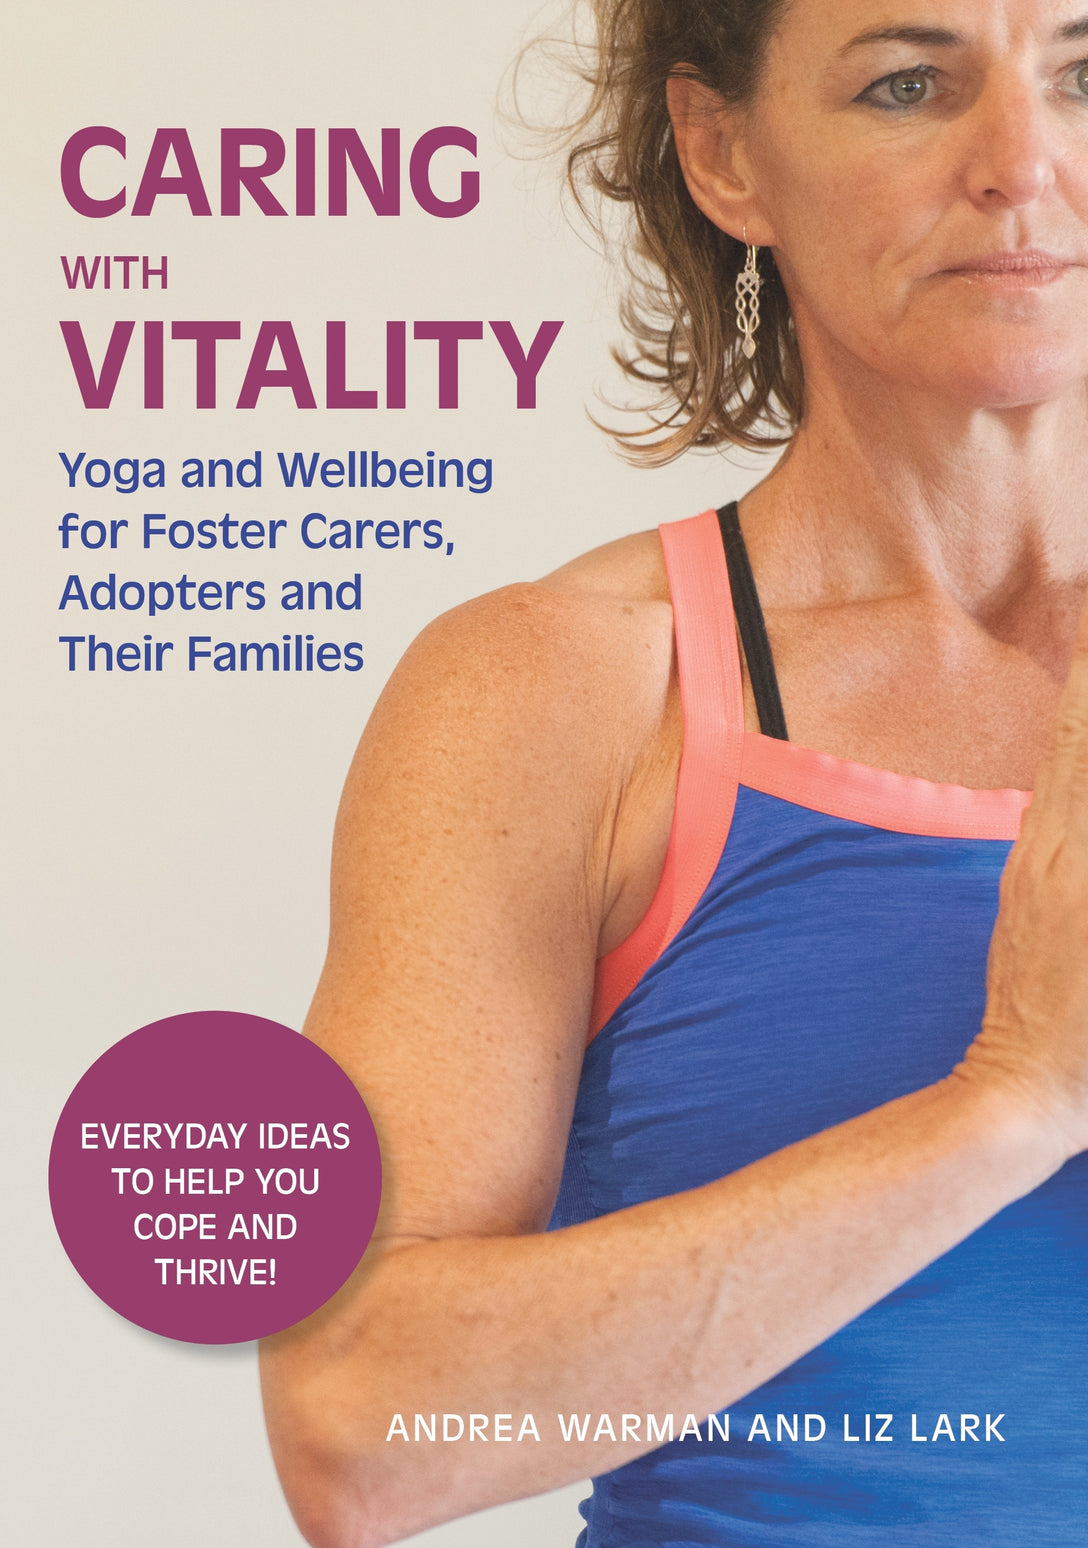 Caring with Vitality - Yoga and Wellbeing for Foster Carers, Adopters and Their Families by Andrea Warman, Liz Lark